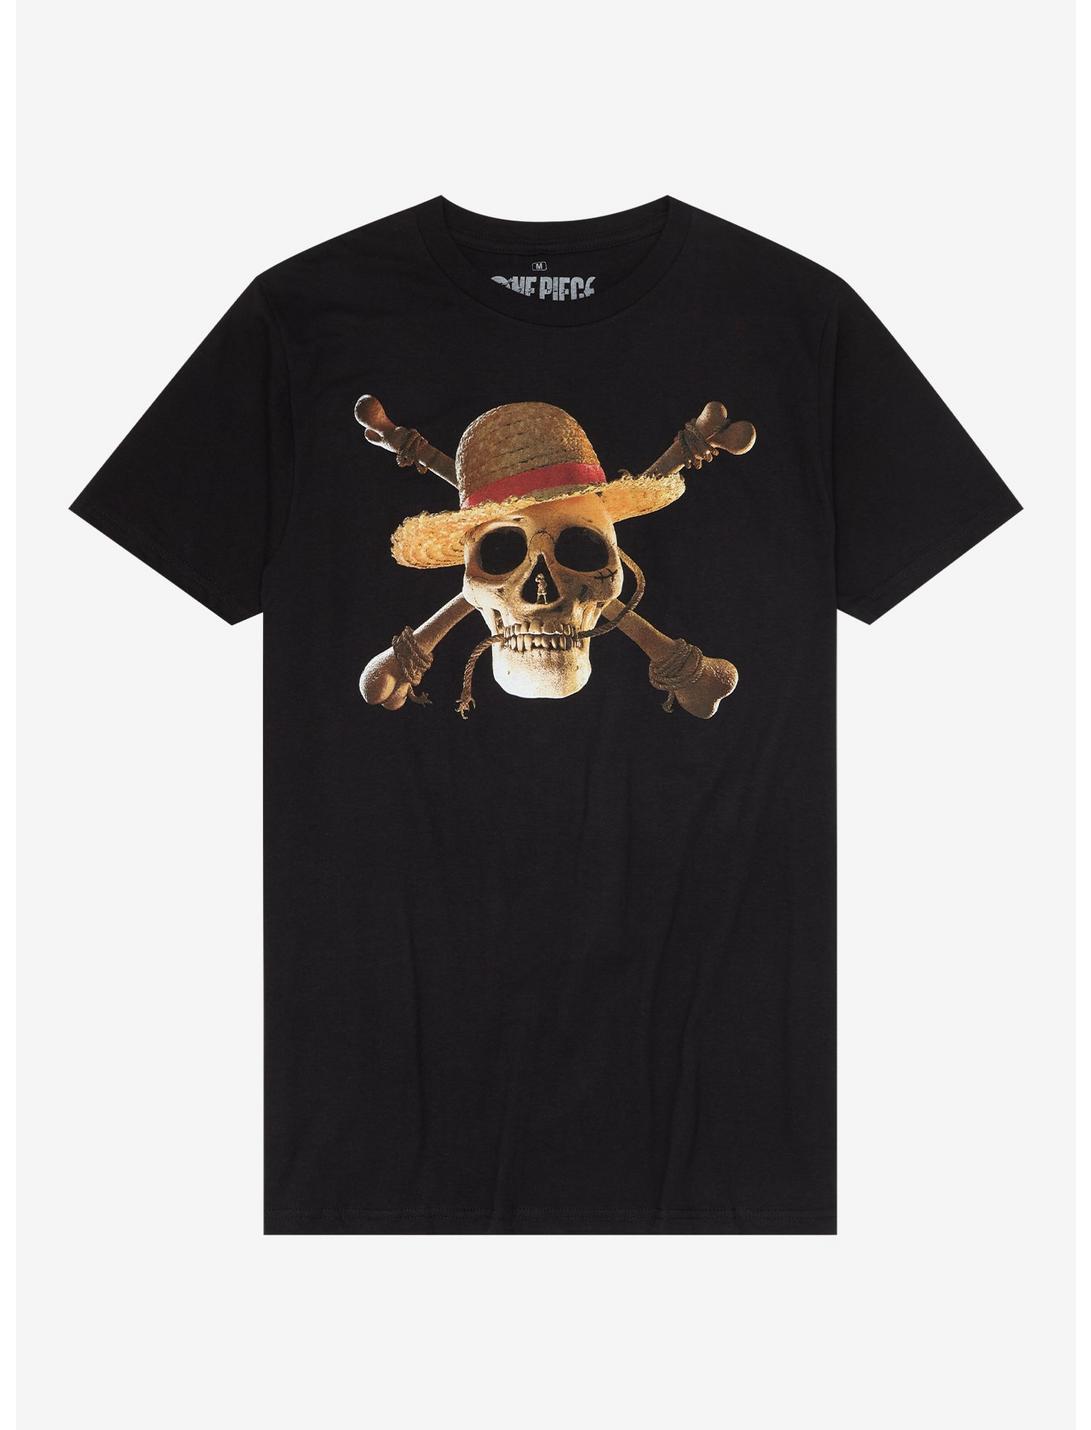 One Piece Straw Hats Live Action Jolly Roger T-Shirt, BLACK, hi-res